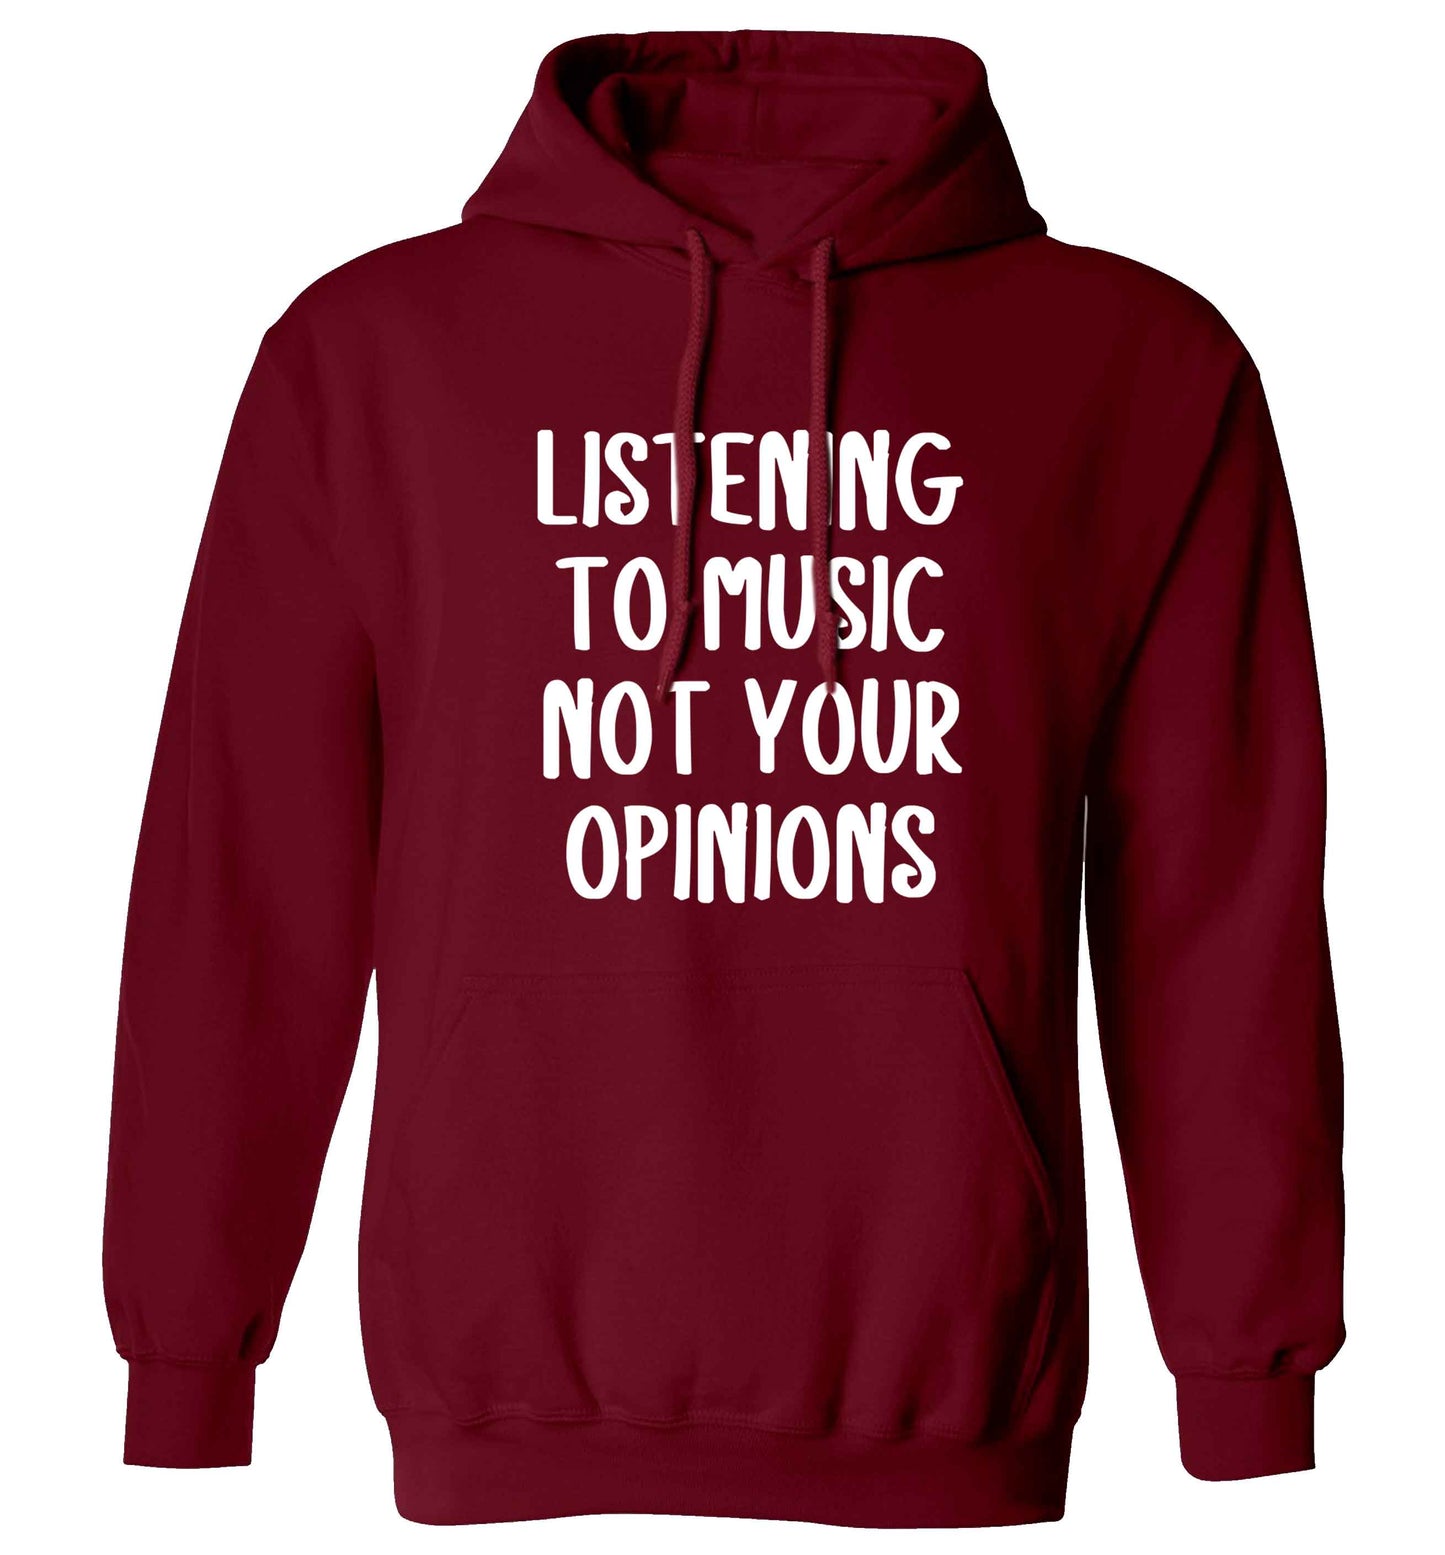 Listening to music not your opinions adults unisex maroon hoodie 2XL